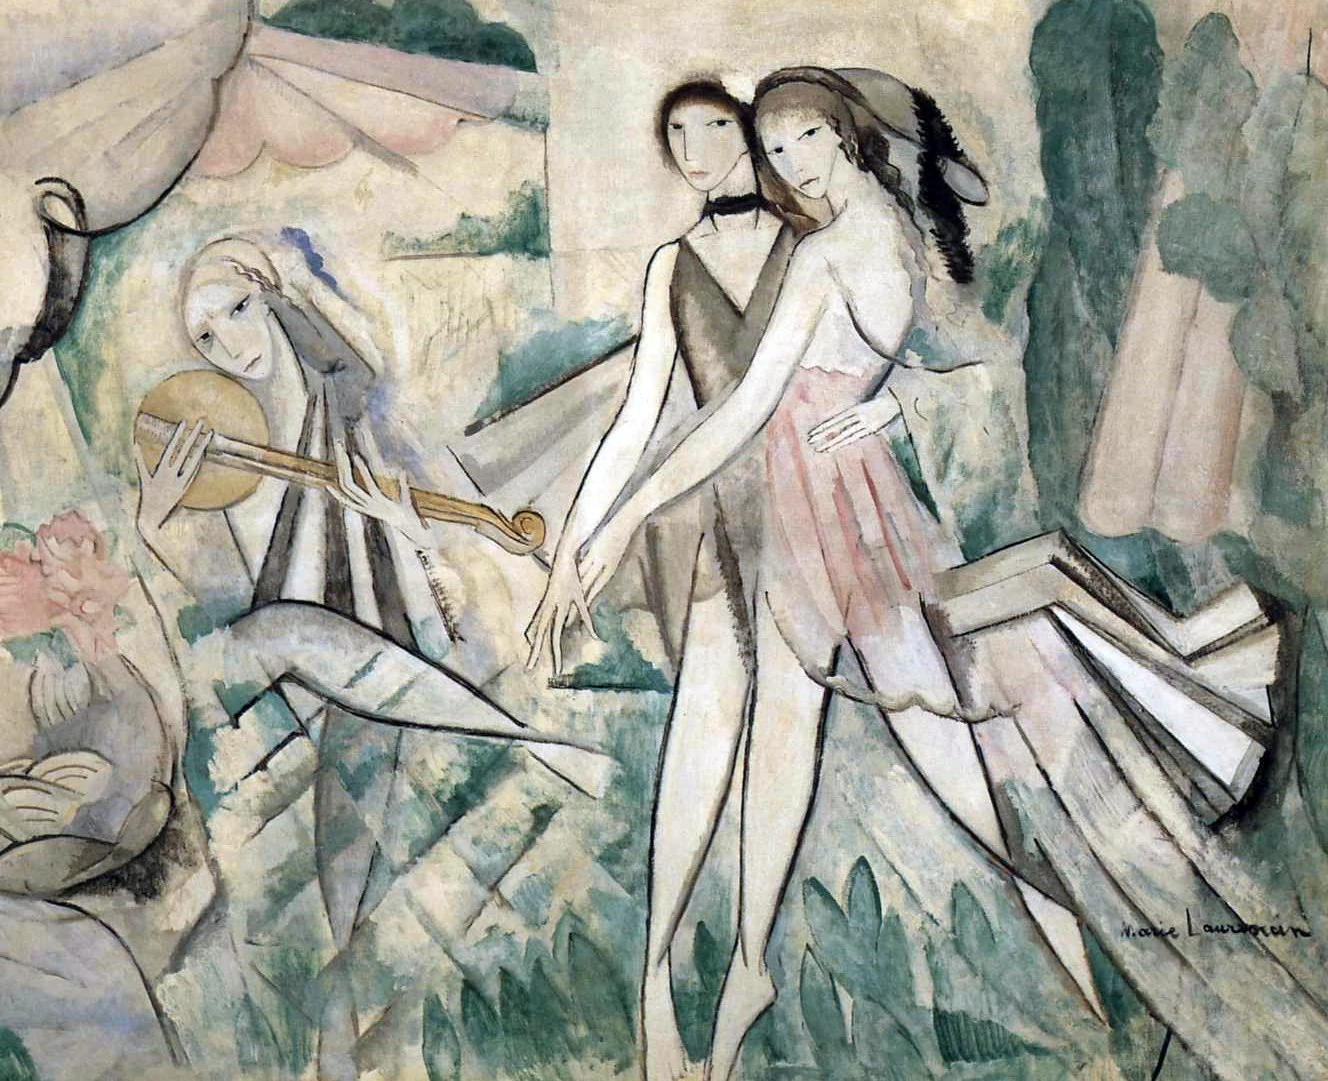 The Elegant Ball, the Country Dance, Marie Laurencin